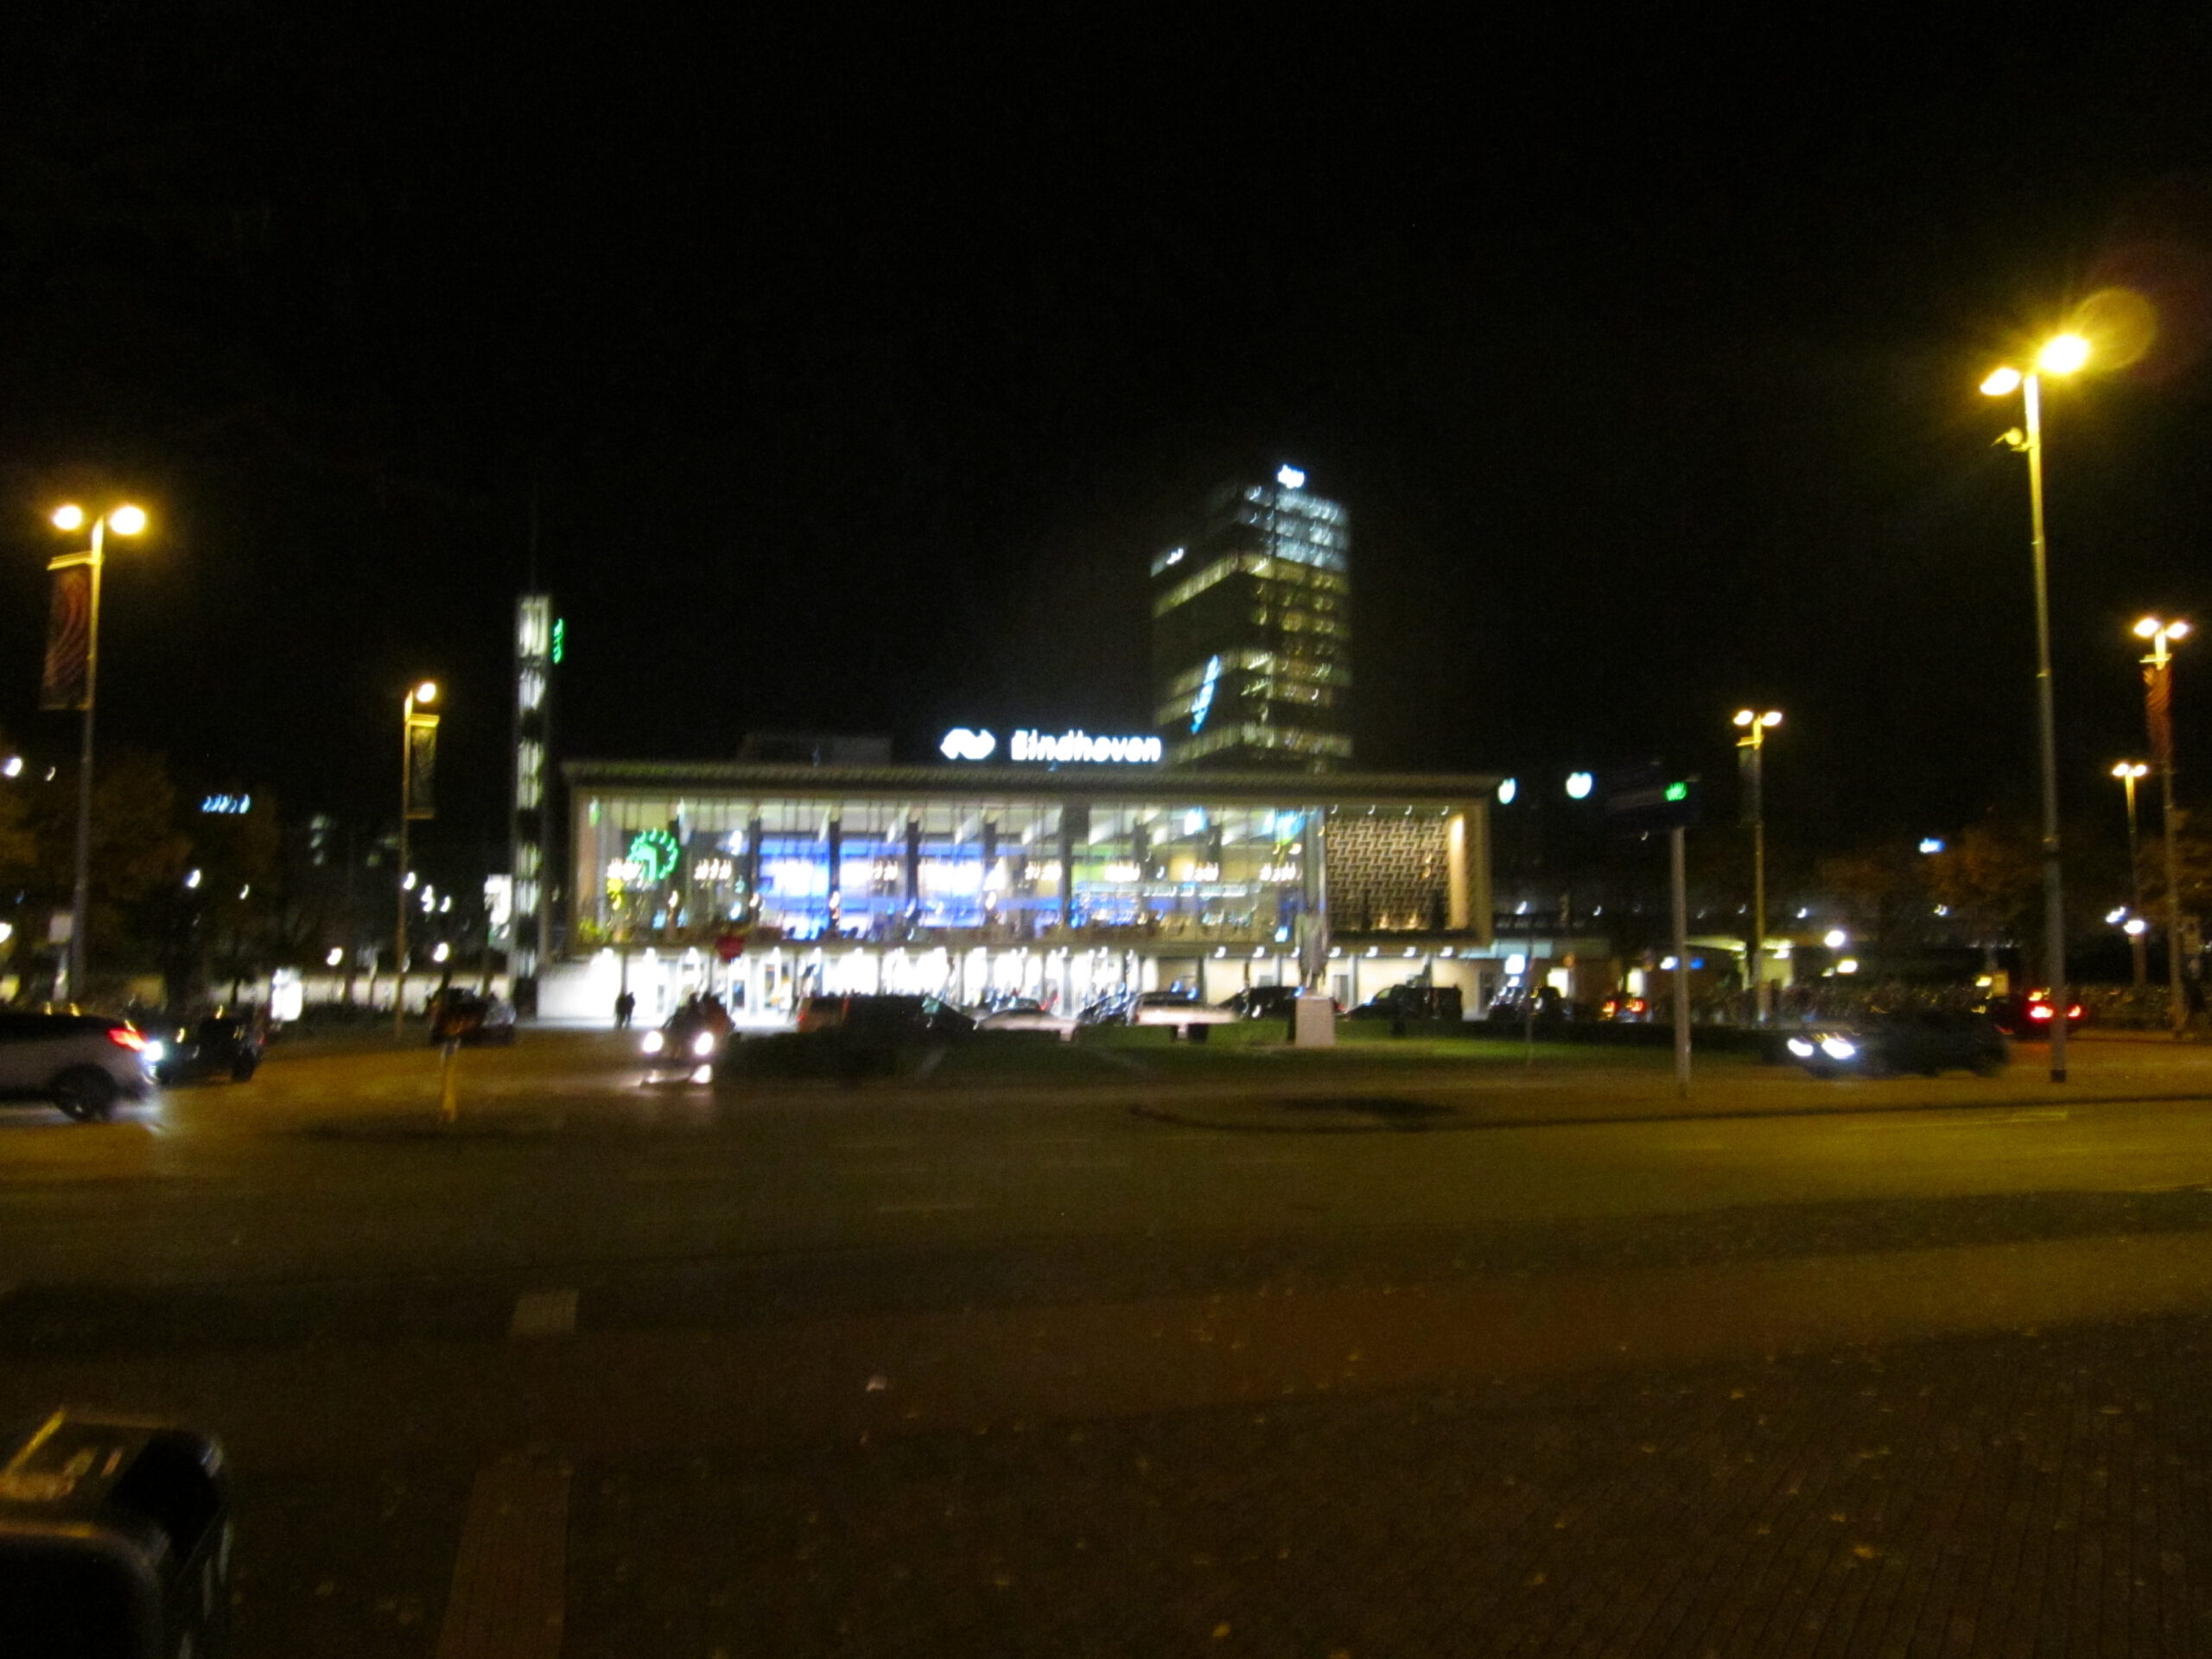 Station Eindhoven by night 2014